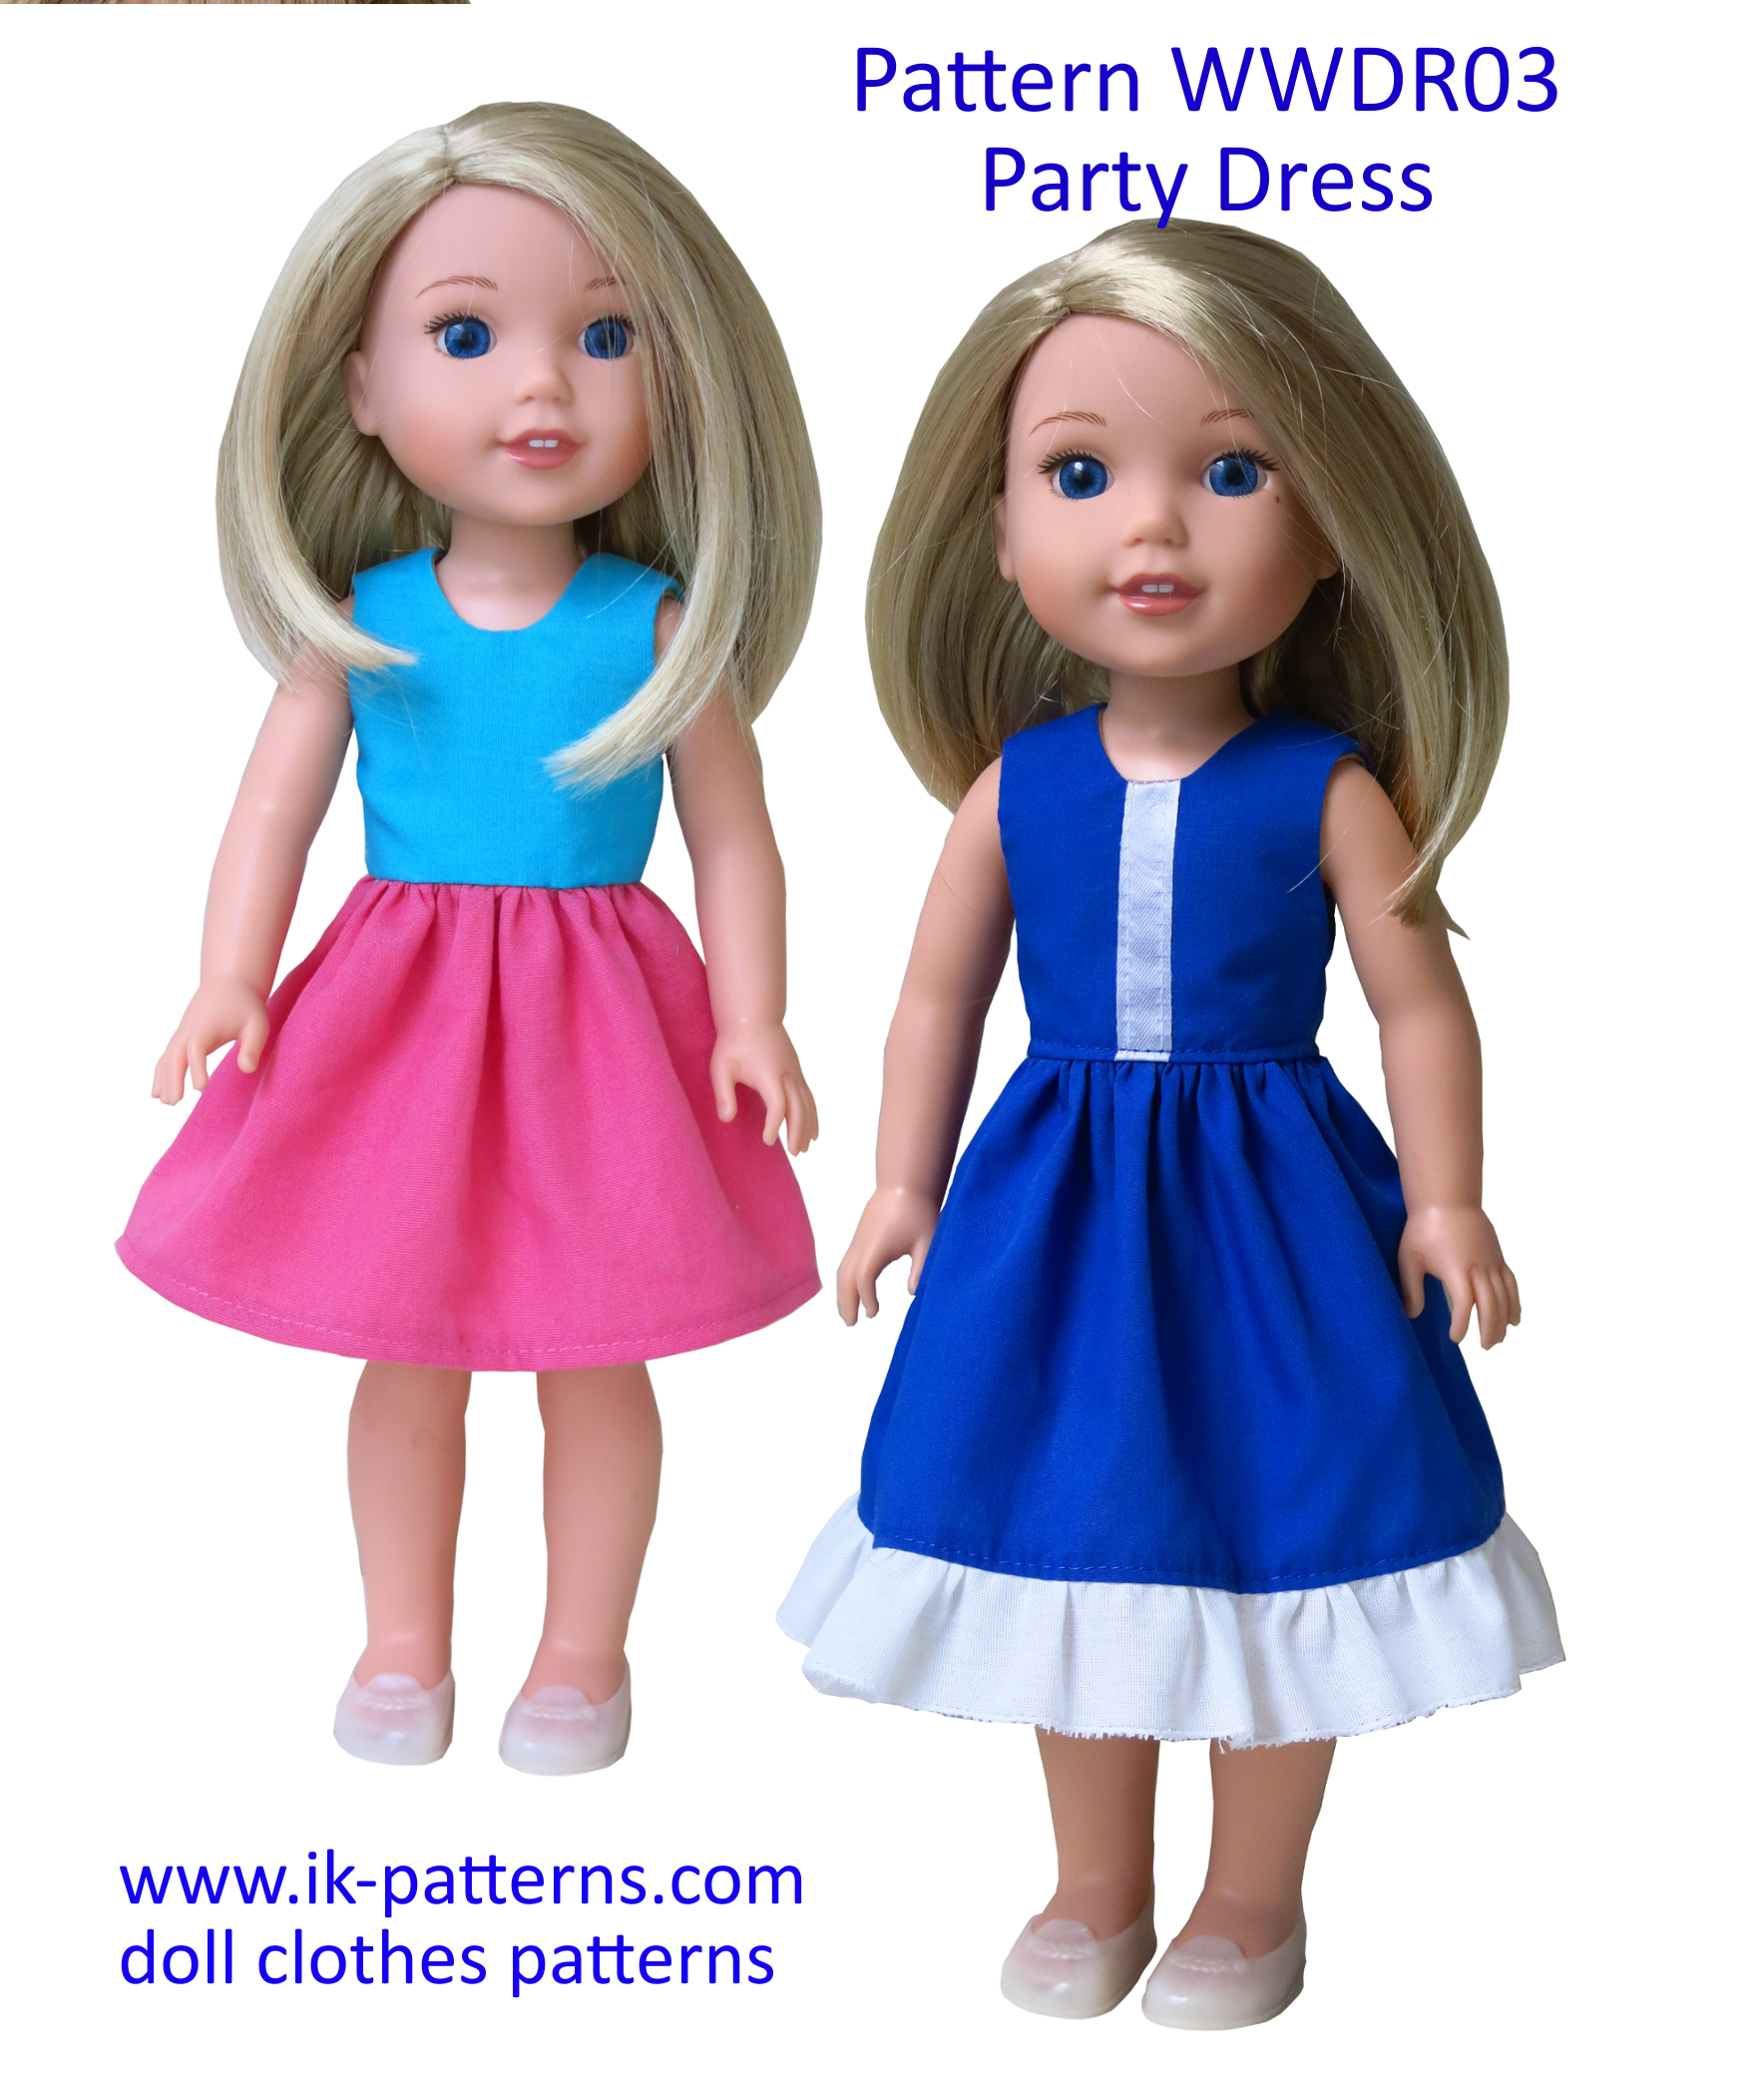 Free Knitting Patterns For 14 Inch Doll Clothes 14 Inch Doll Clothes Patterns